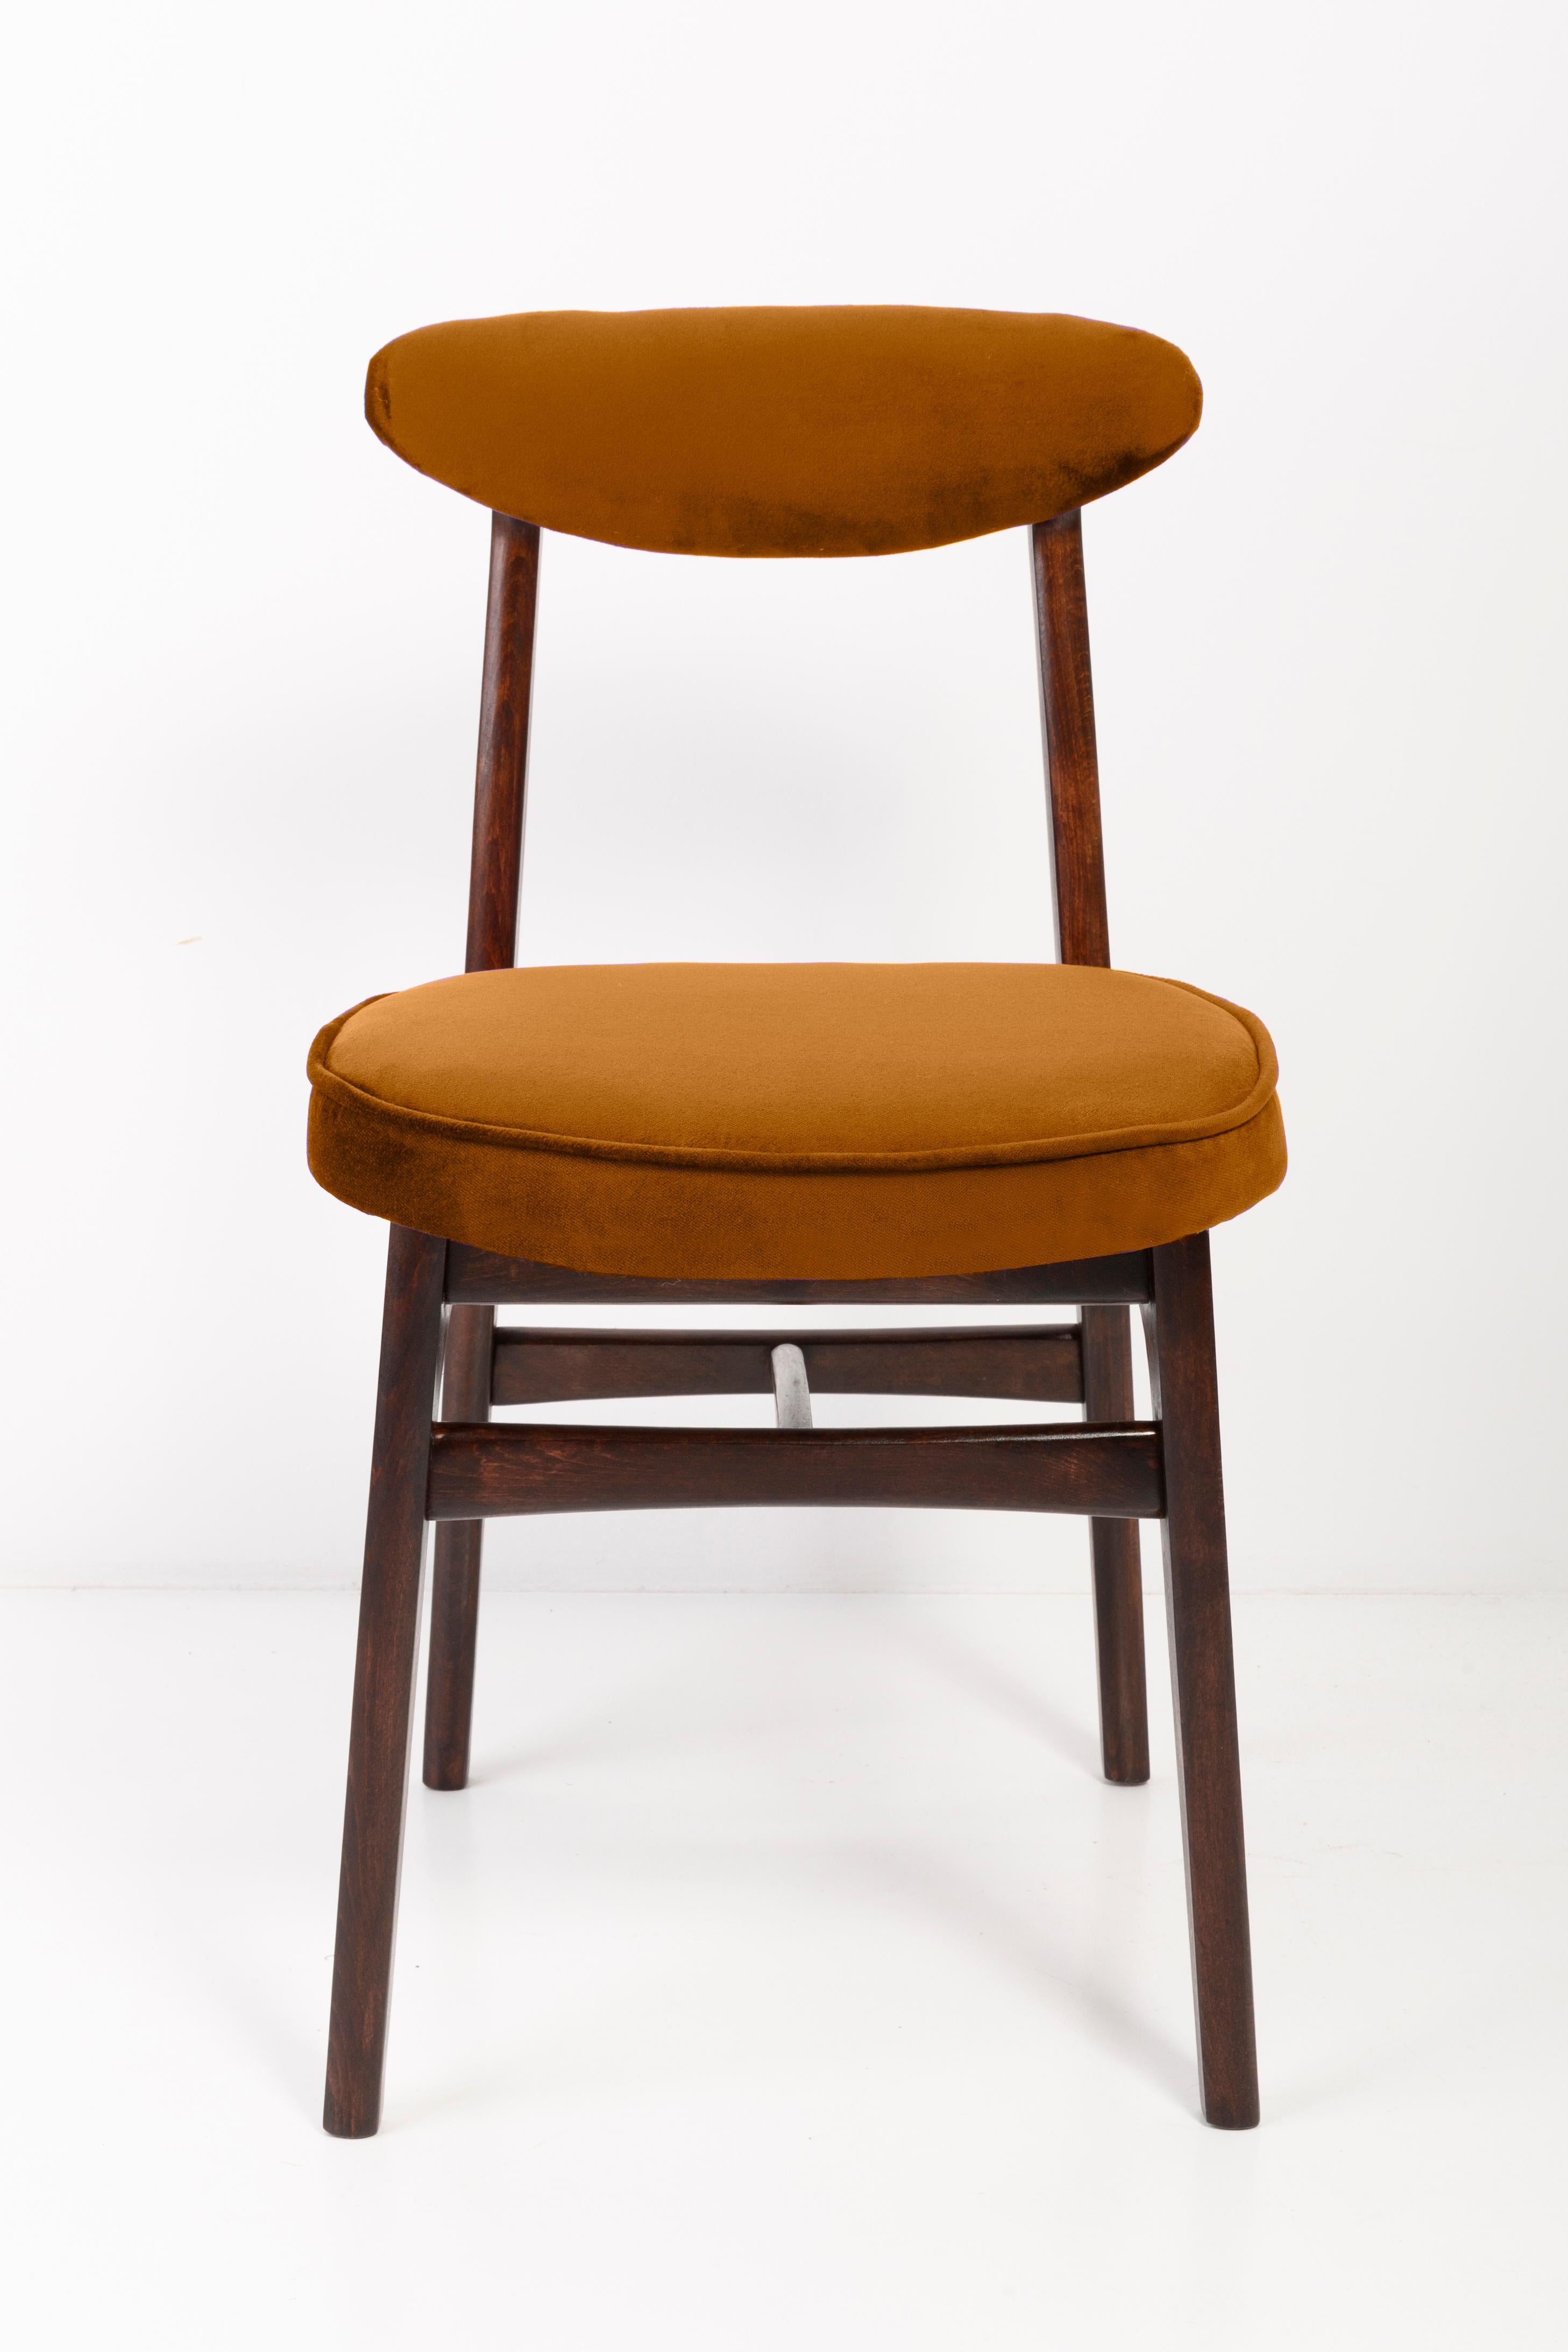 Hand-Crafted Twelve 20th Century Copper Velvet Chairs designed by Rajmund Halas Europe, 1960s For Sale